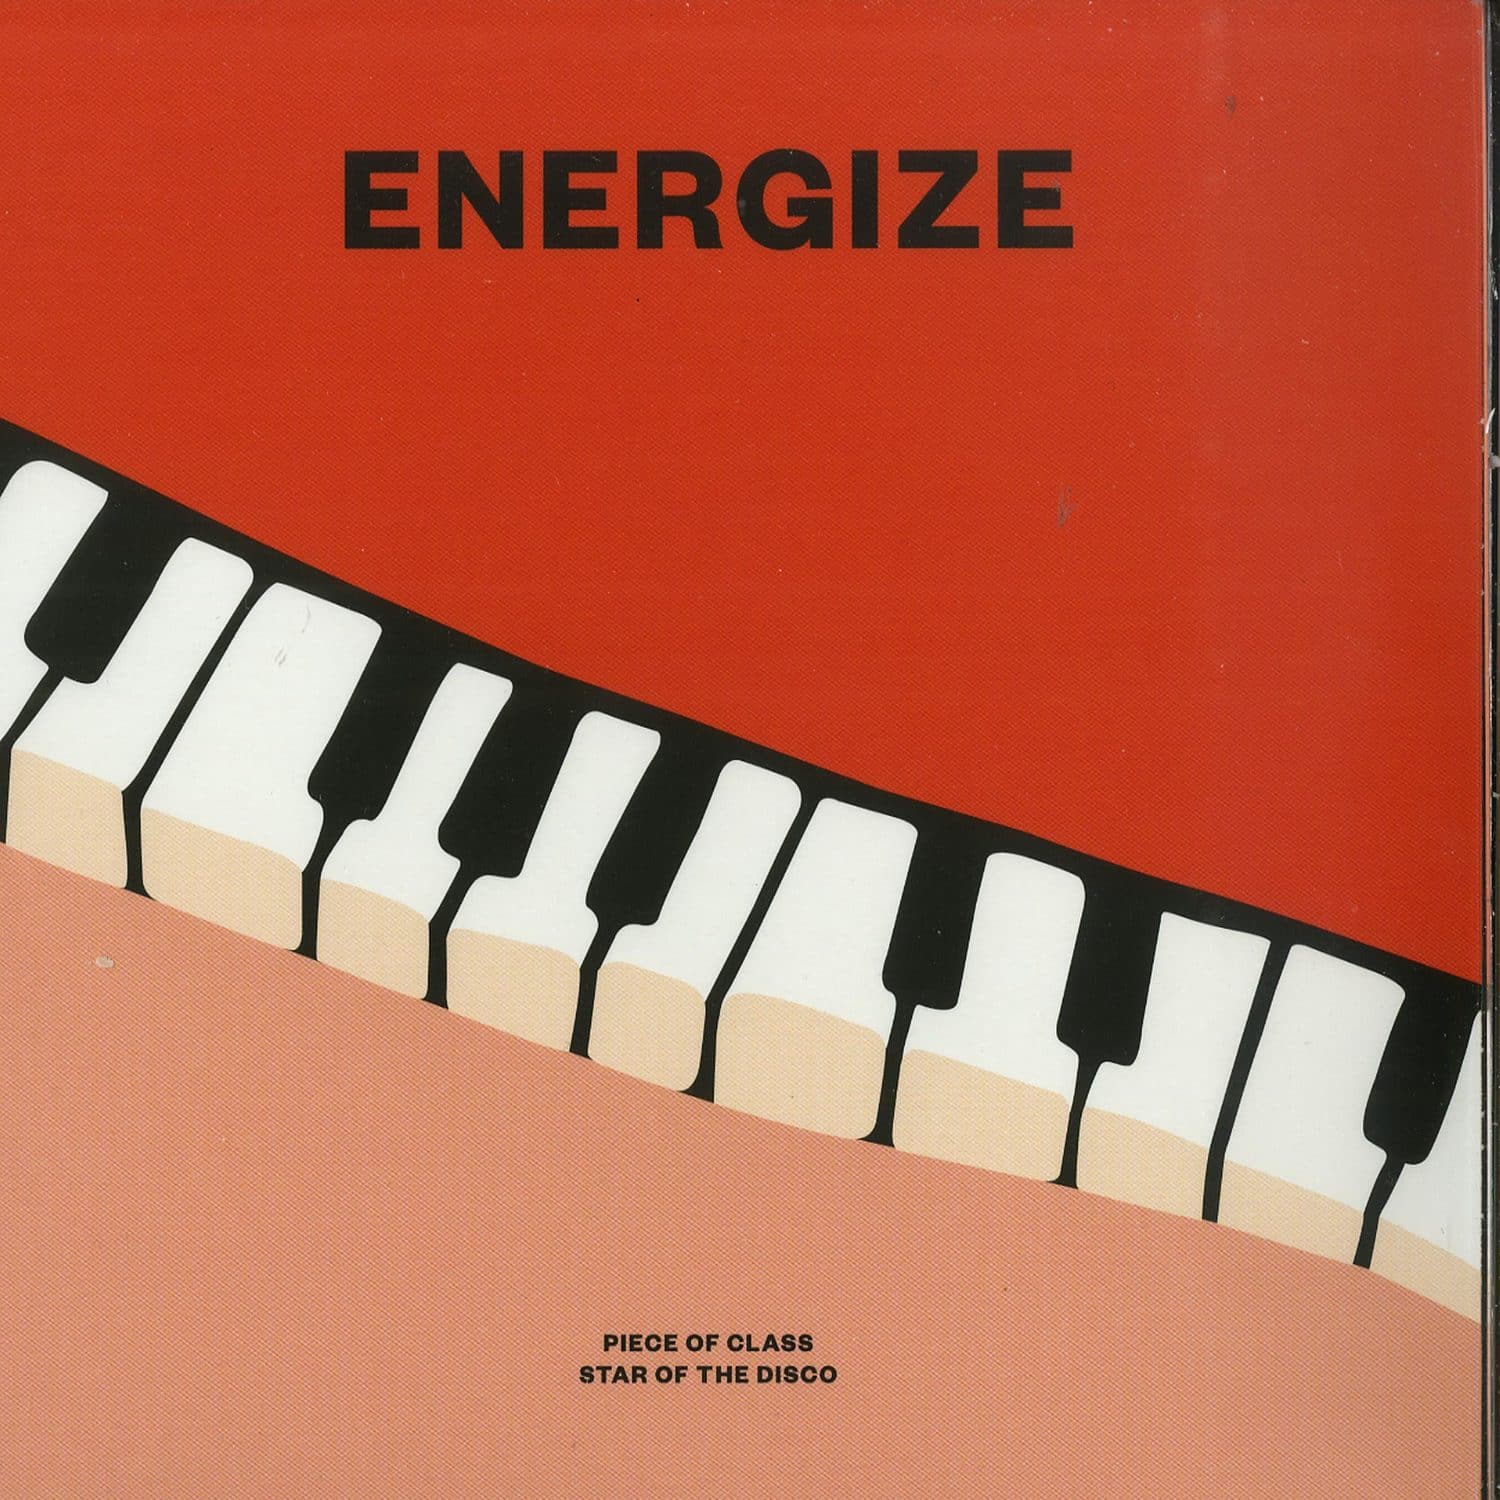 Energize - PIECE OF CLASS / STAR OF THE DISCO 